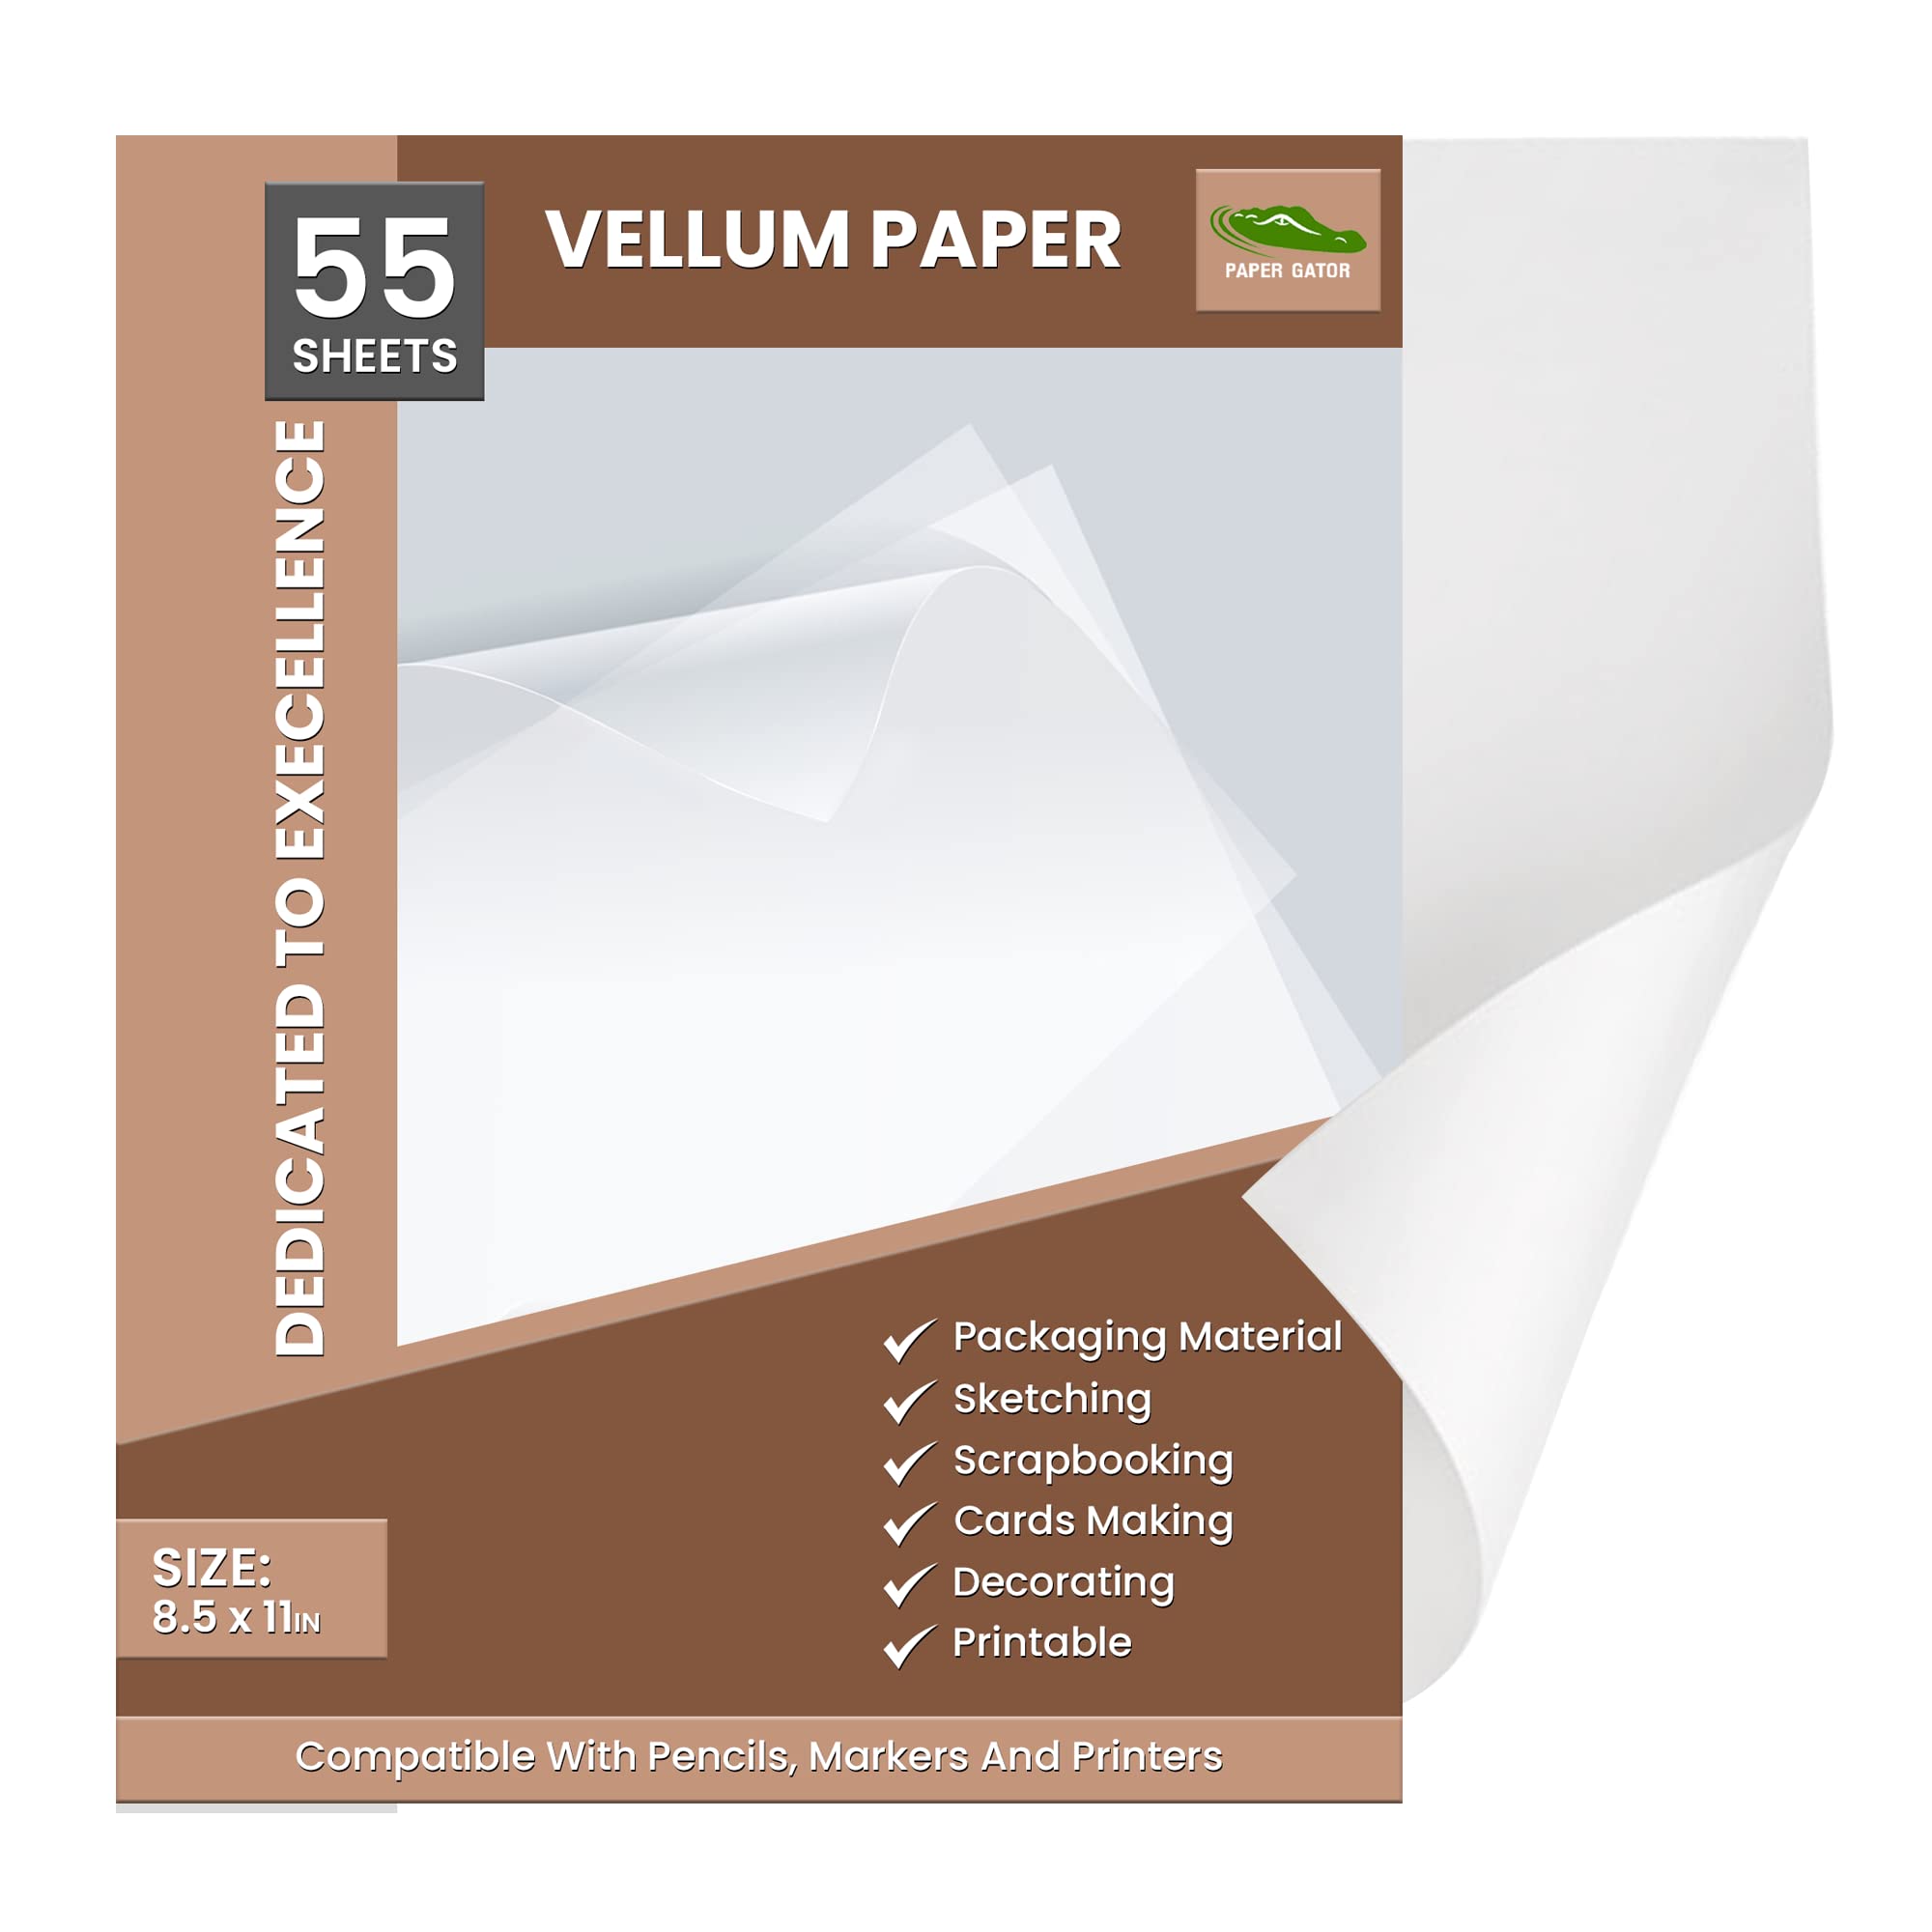 Translucent Printable Vellum Tracing Paper 100 Sheets 8.5x11 100